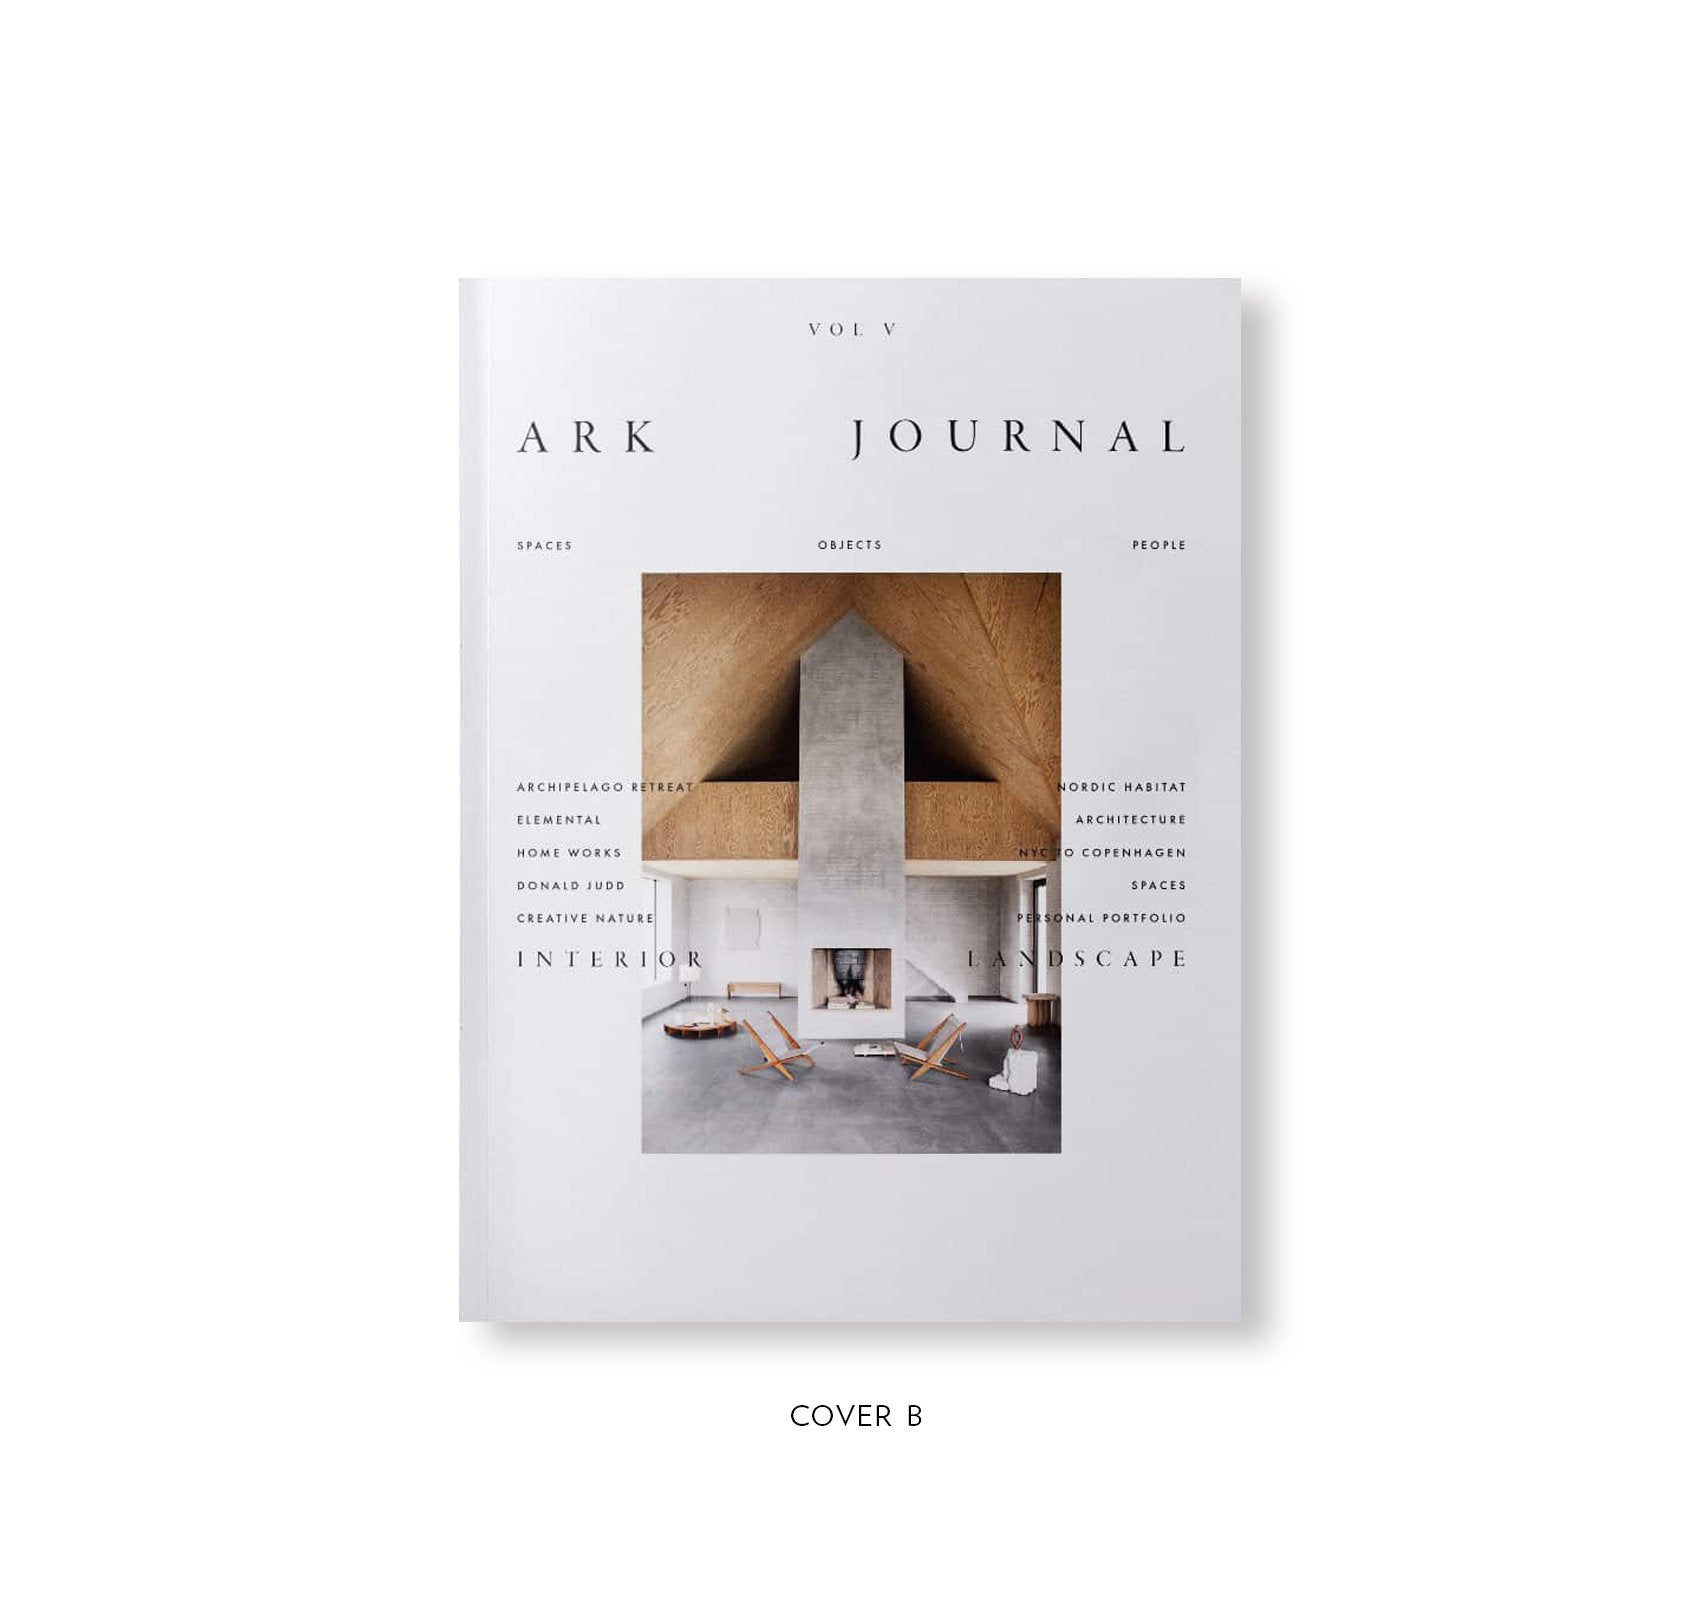 ARK JOURNAL vol.8 Ⅷ アークジャーナル 海外 洋書 雑誌 北欧-